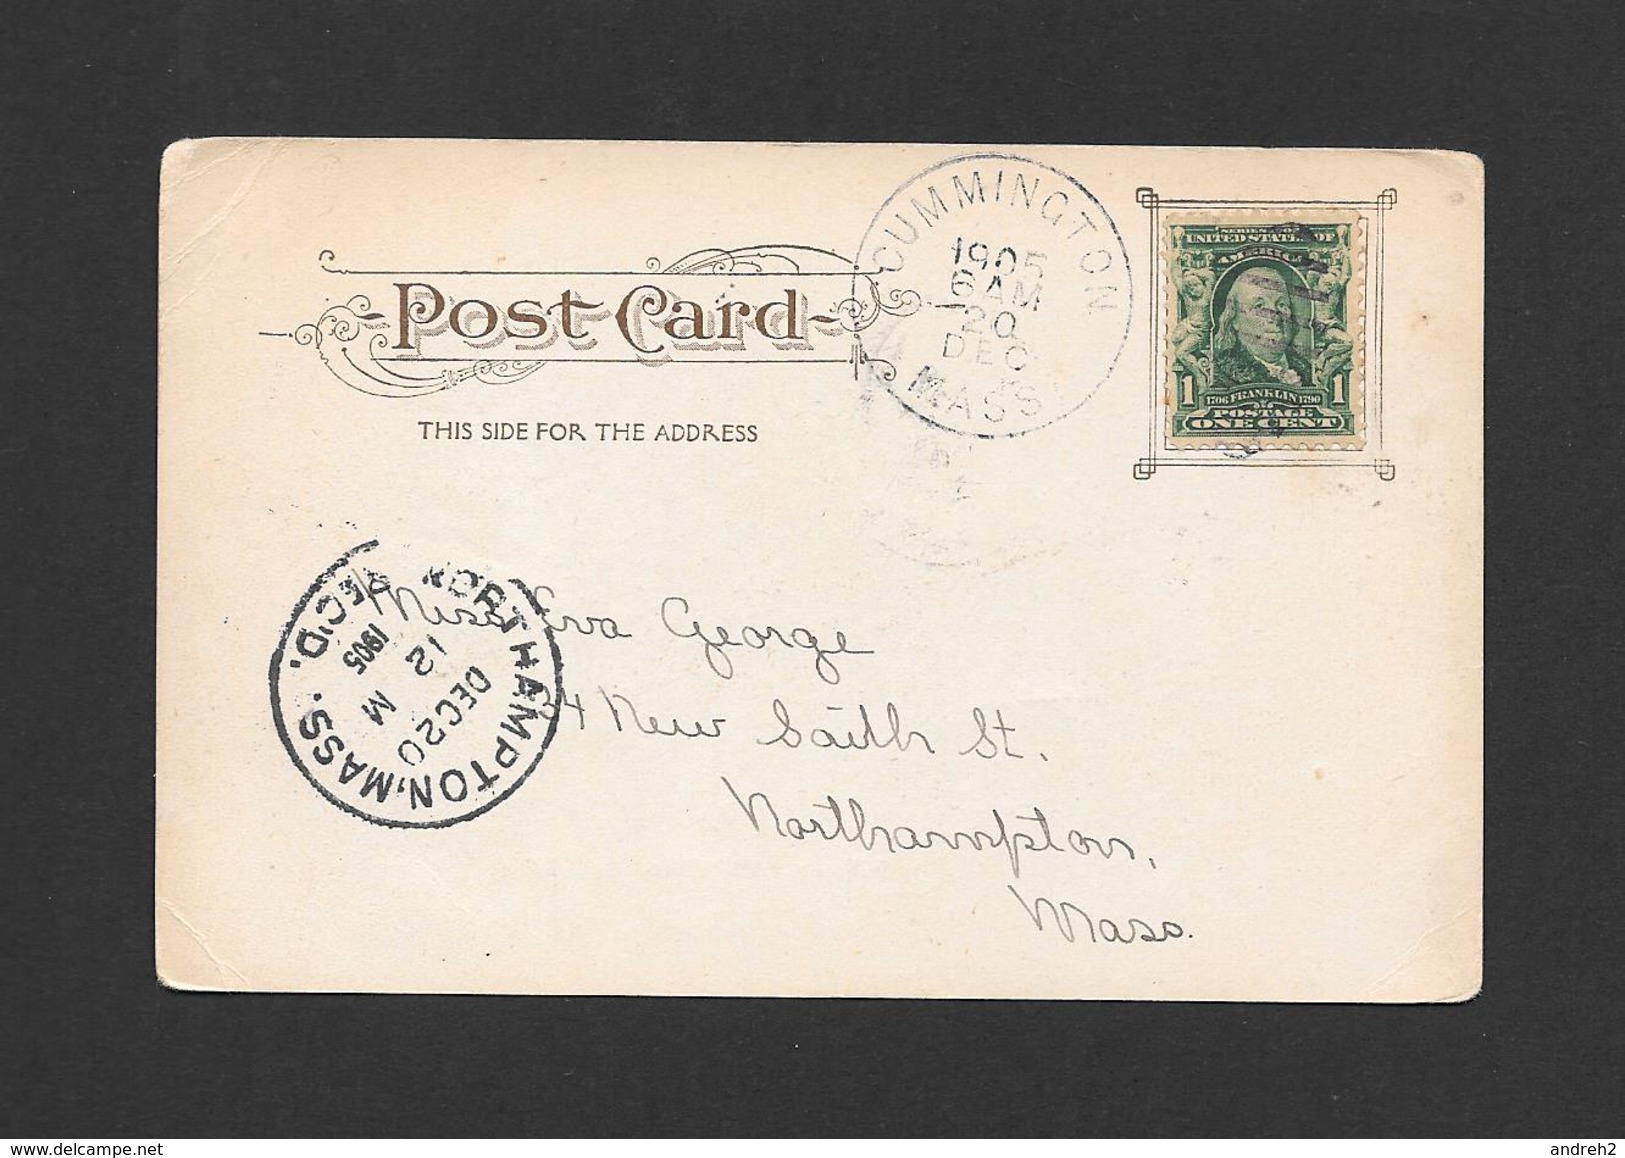 NORTHAMPTON - MASSACHUSETTS - ASSEMBLY HALL AND SMITH COLLEGE BUILDING - CARD WRITTEN IN 1905 - WONDERFUL STAMP - Northampton